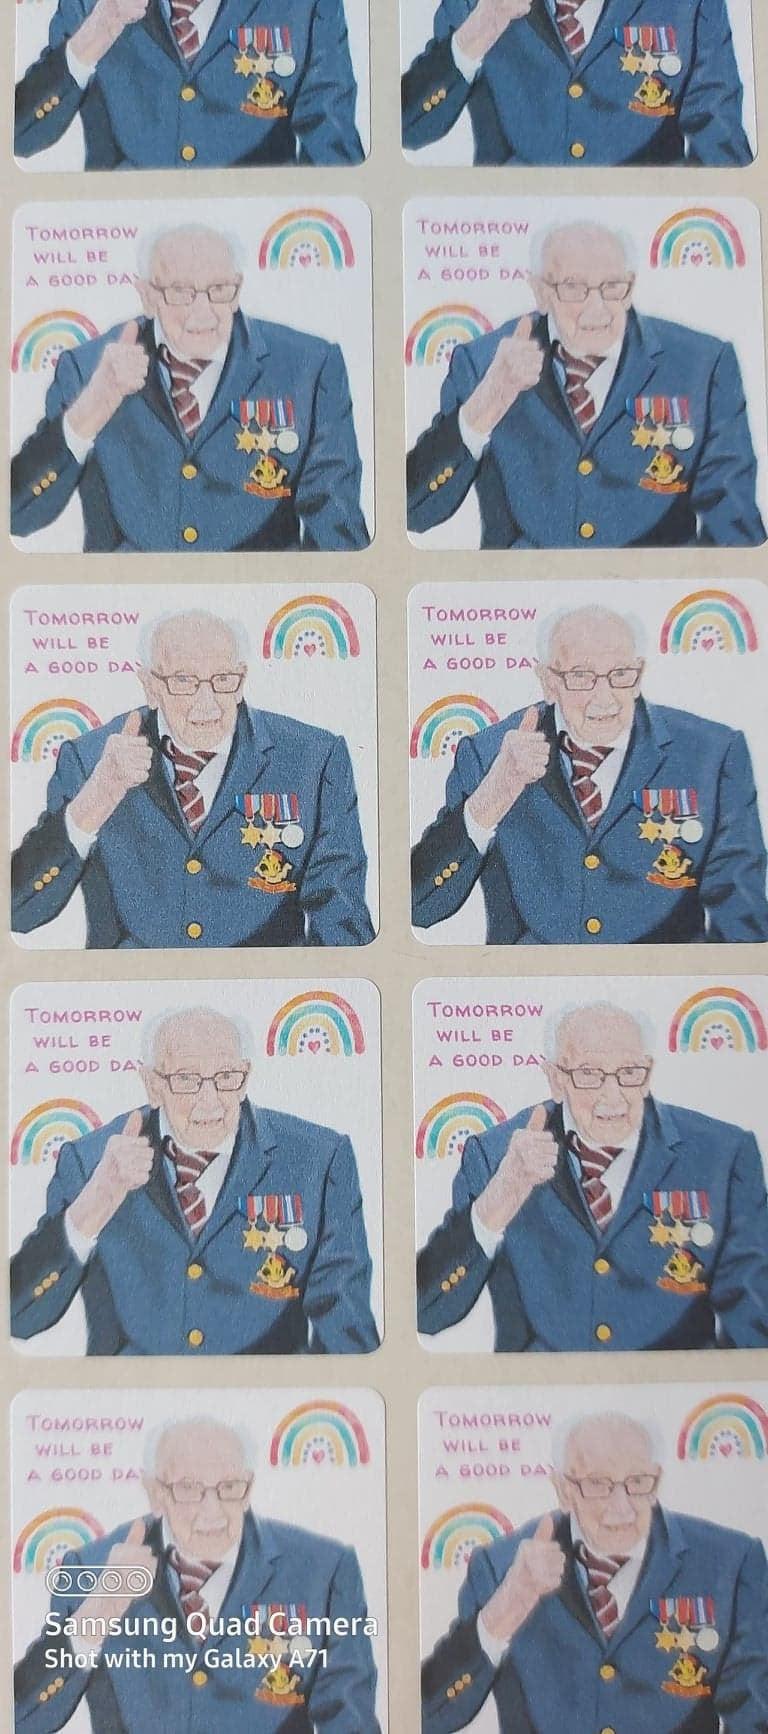 Captain Sir Tom Moore stickers 35mm Square - Journaling- Letter Writing- Gift cards- Inspirational